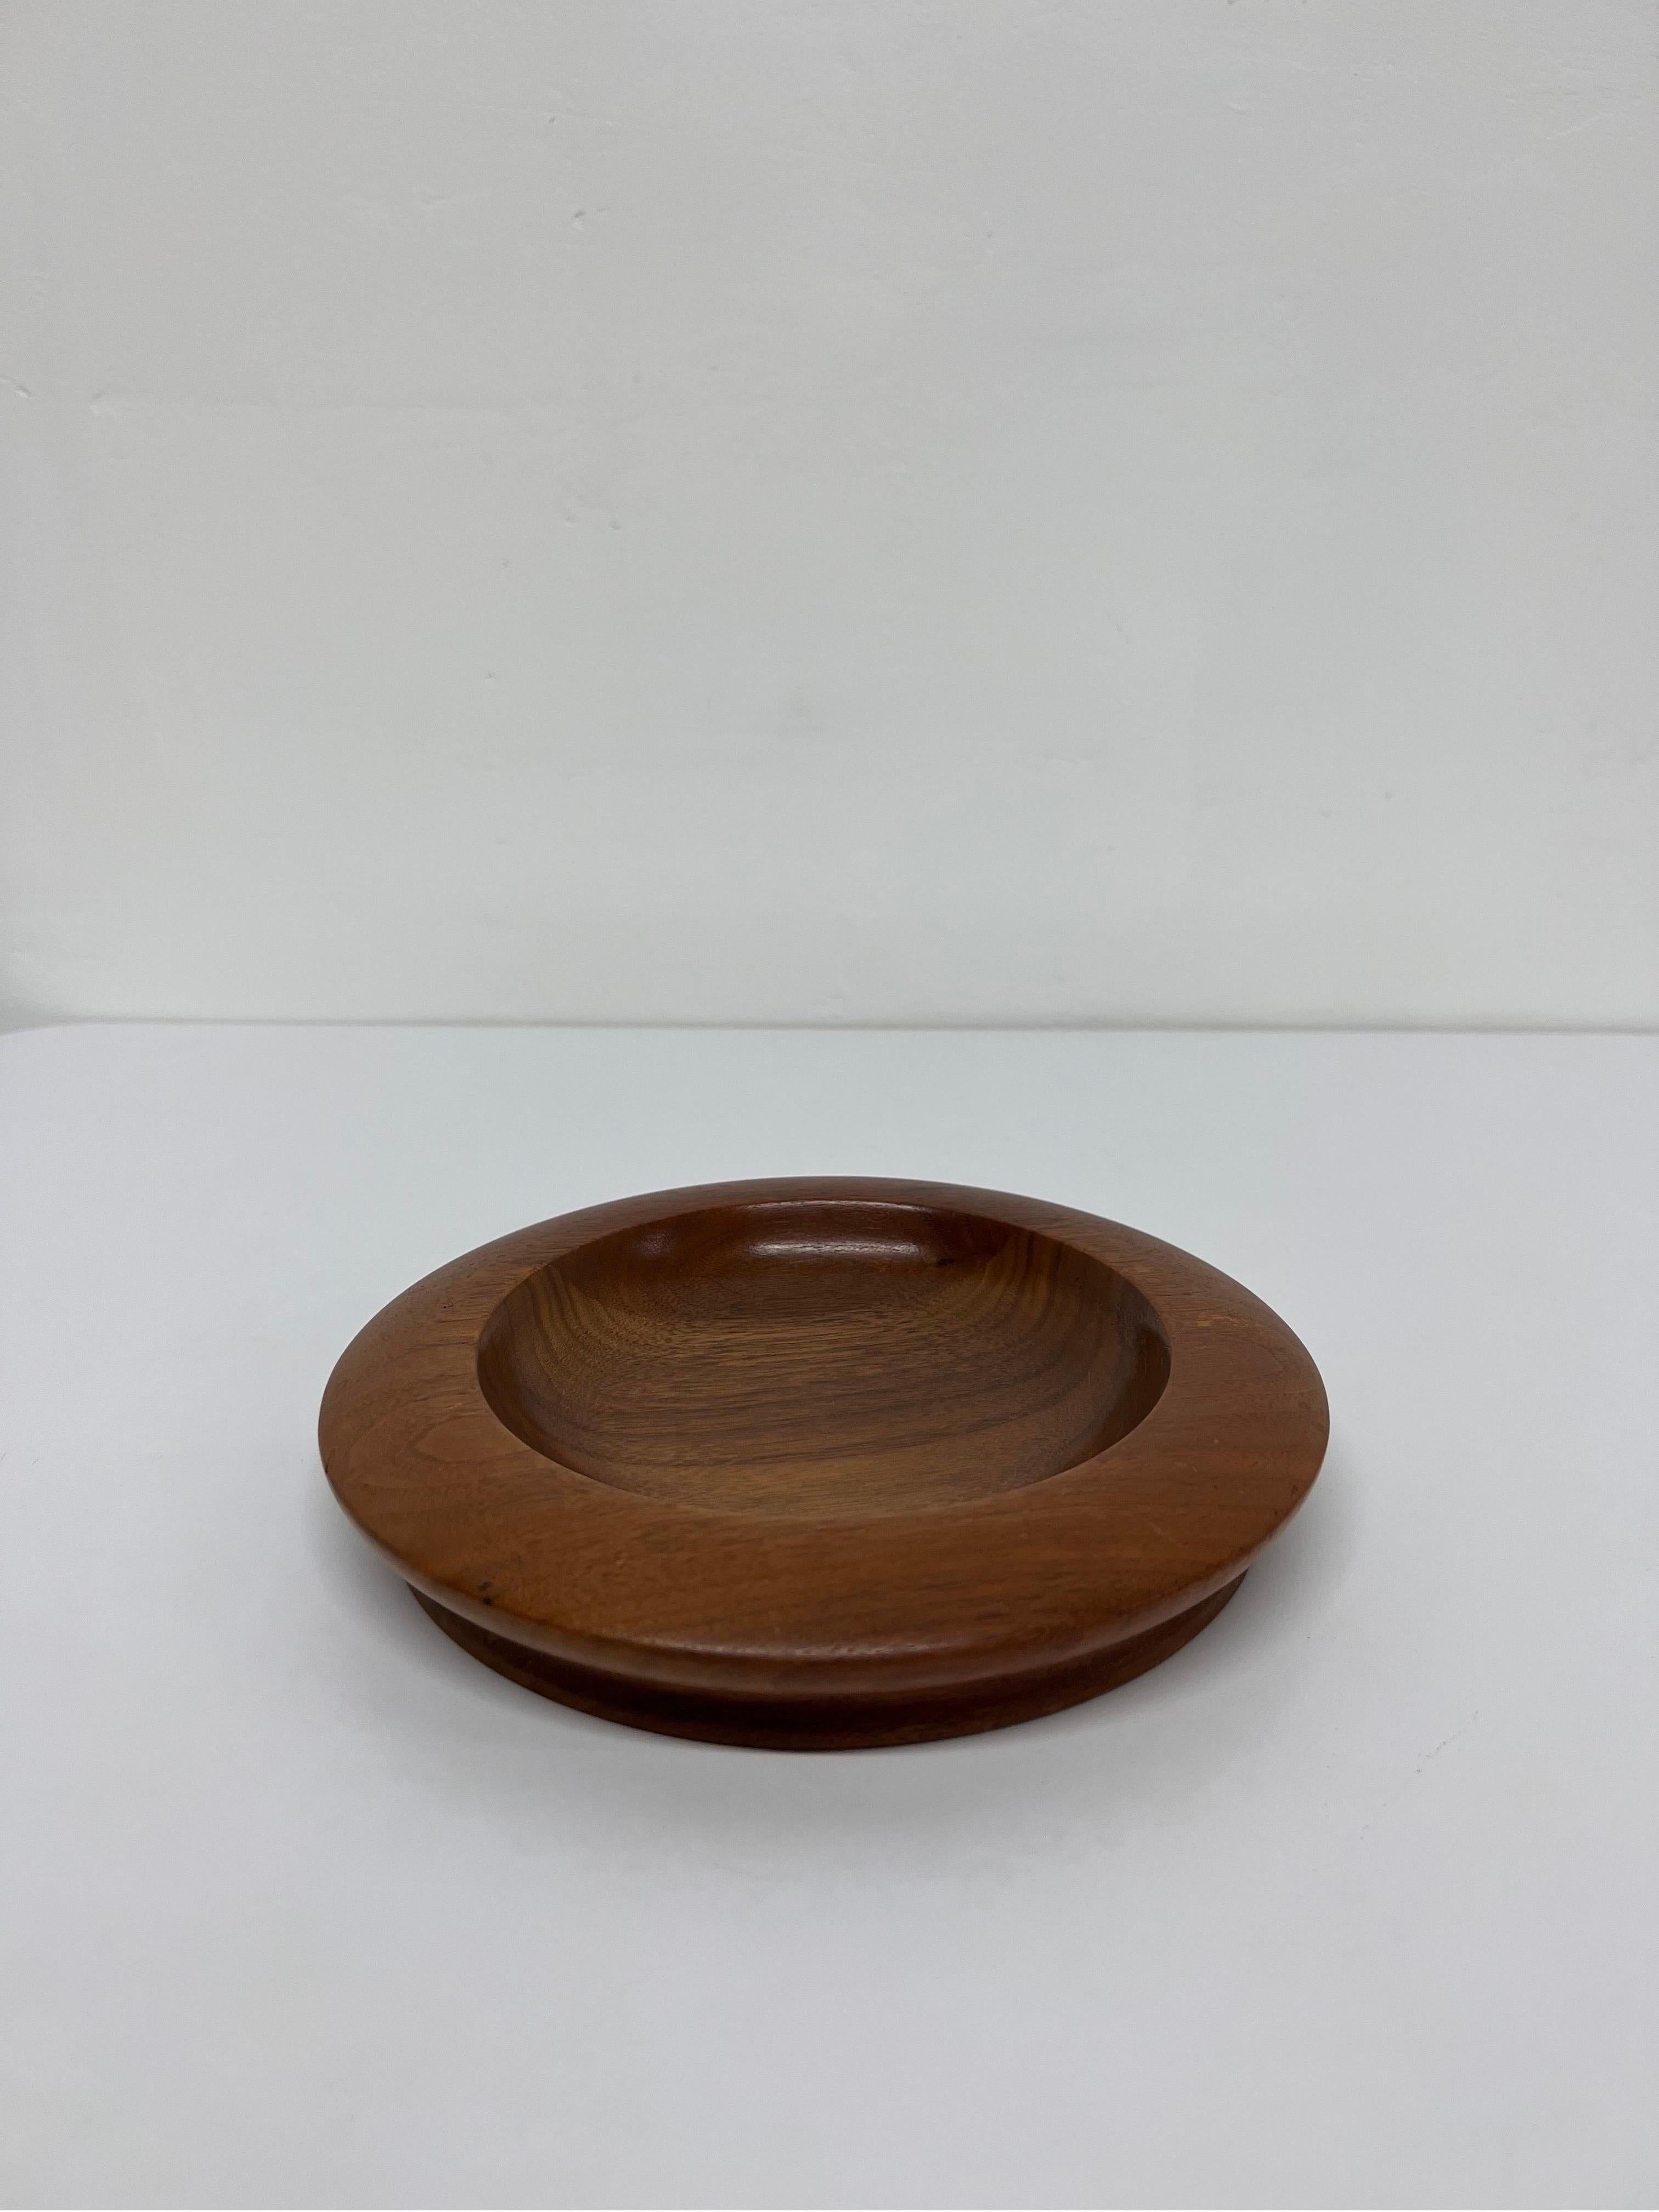 Solid American walnut catchall, ashtray or small bowl from the 1950s.